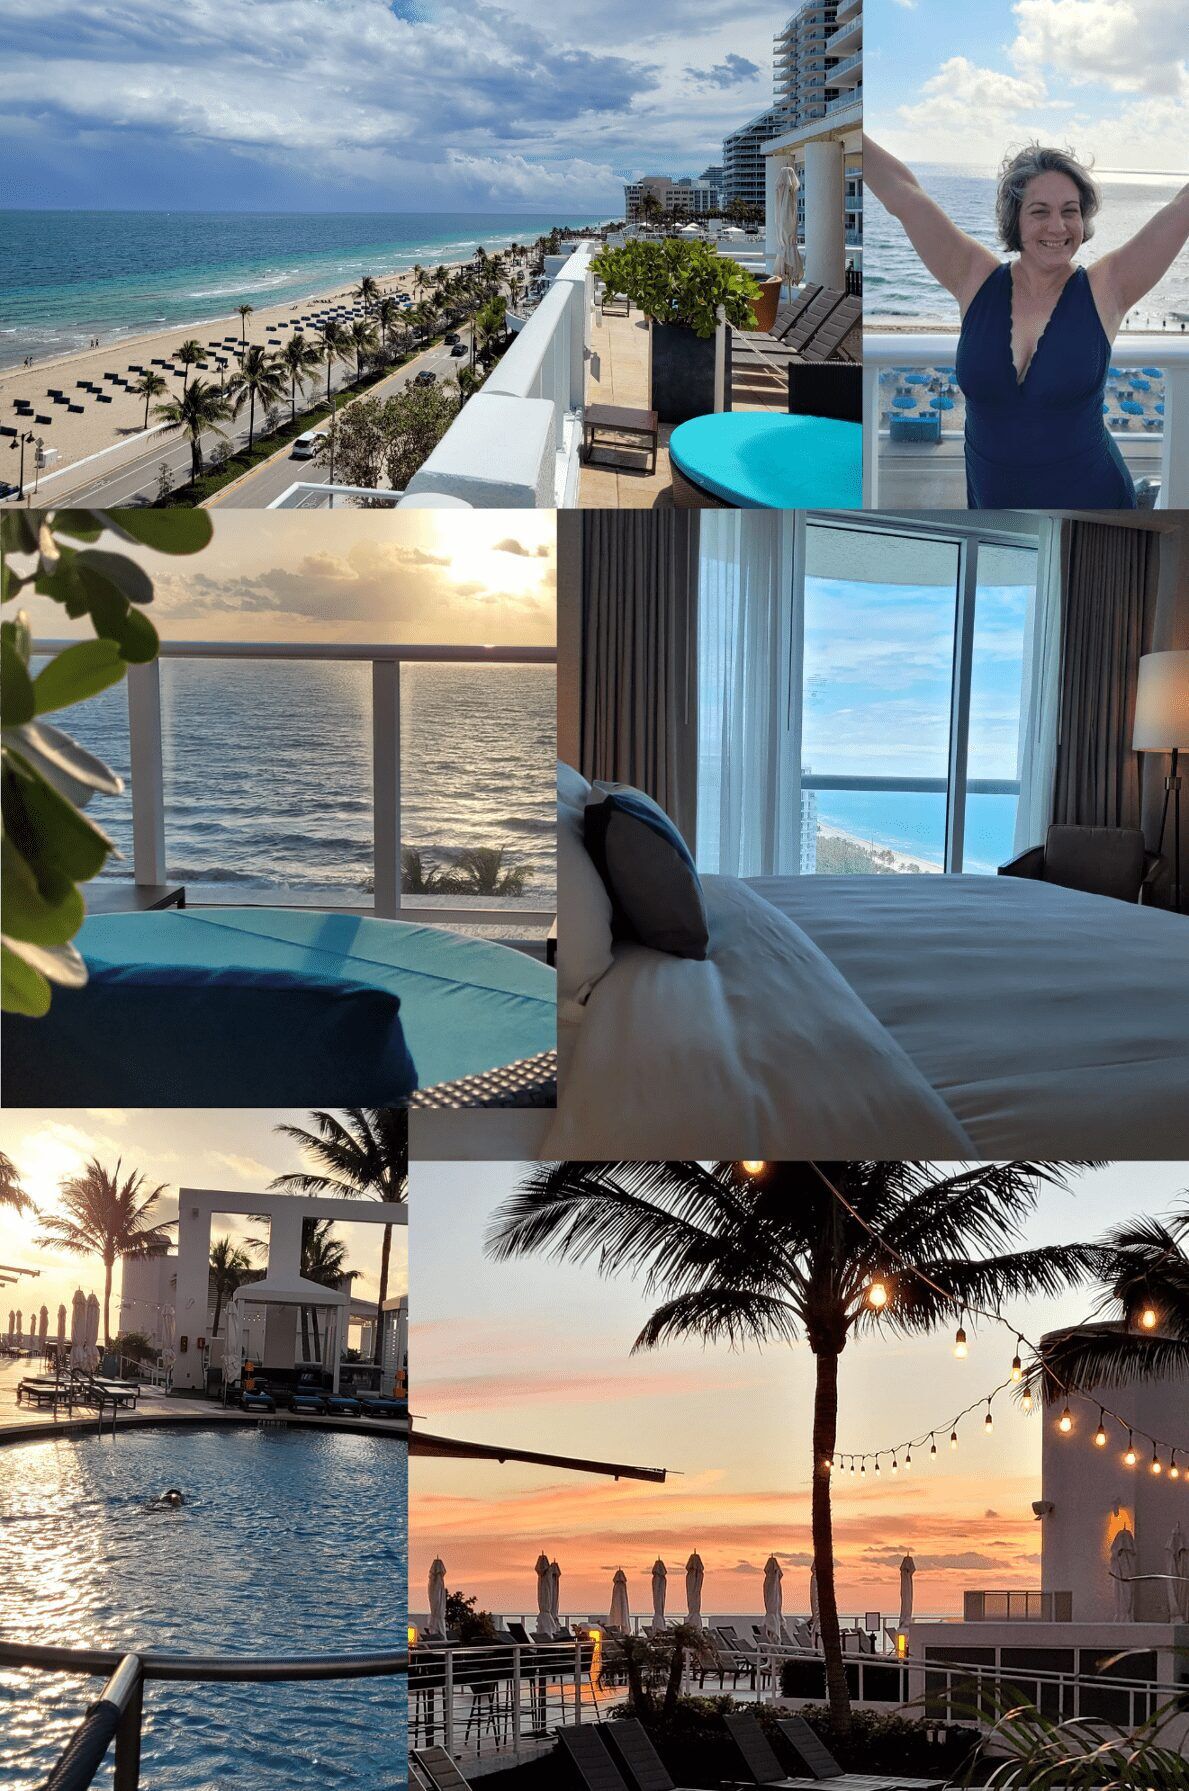 The Conrad Hotel in Fort Lauderdale, Florida, USA A captivating collage of Fort Lauderdale captured by renowned travel blogger, Kathy Brown, featuring stunning images of her exuberantly clad in a blue bathing suit, expressing pure joy. The collage showcases Fort Lauderdale's pristine beaches, luxurious room accommodations, an inviting resort pool, and secluded cabanas, providing a delightful visual journey for travel enthusiasts and vacation seekers.